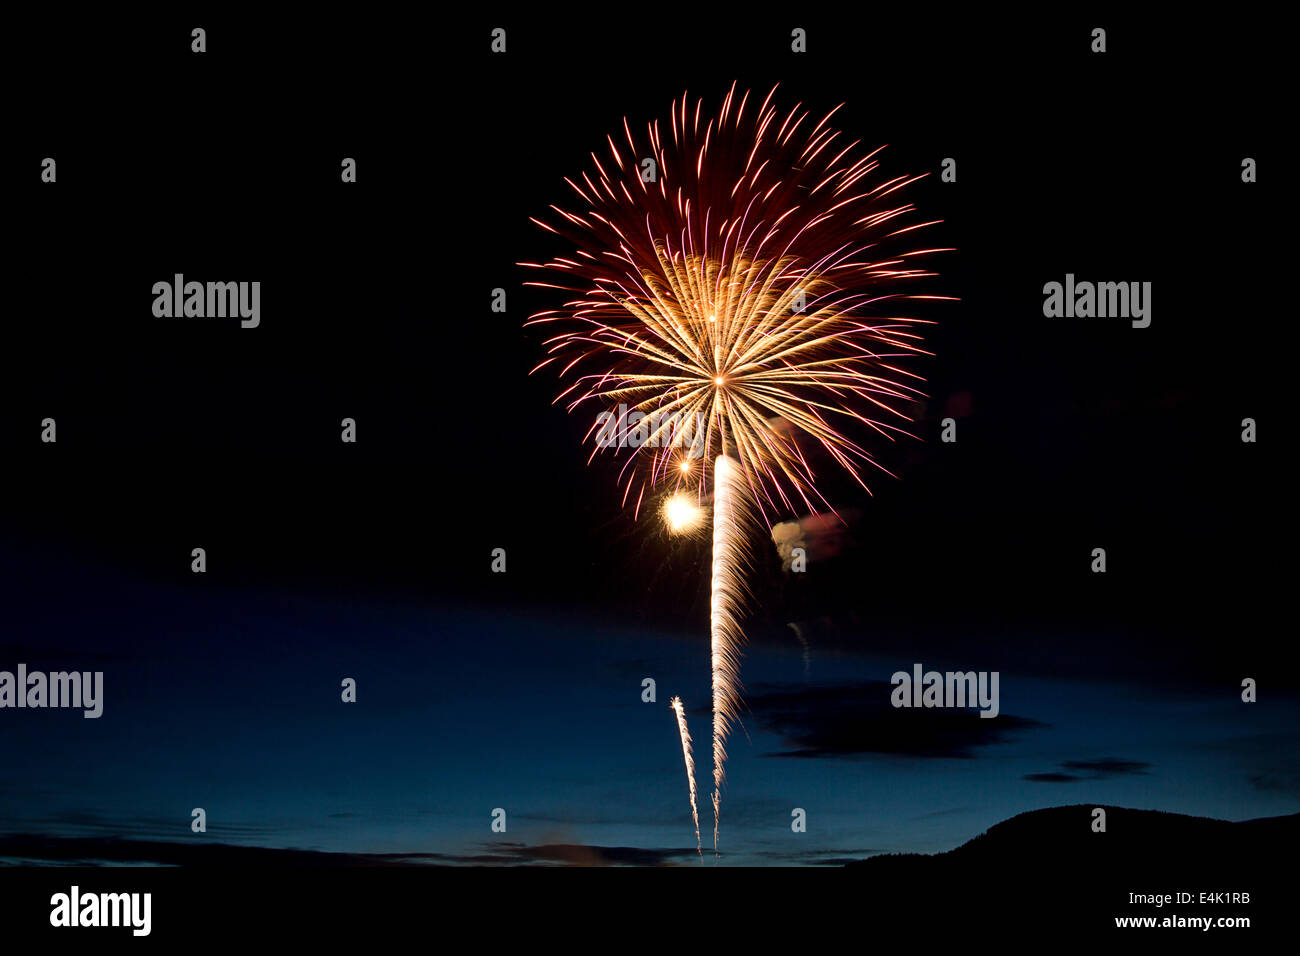 awesome fireworks spectacle. Stock Photo